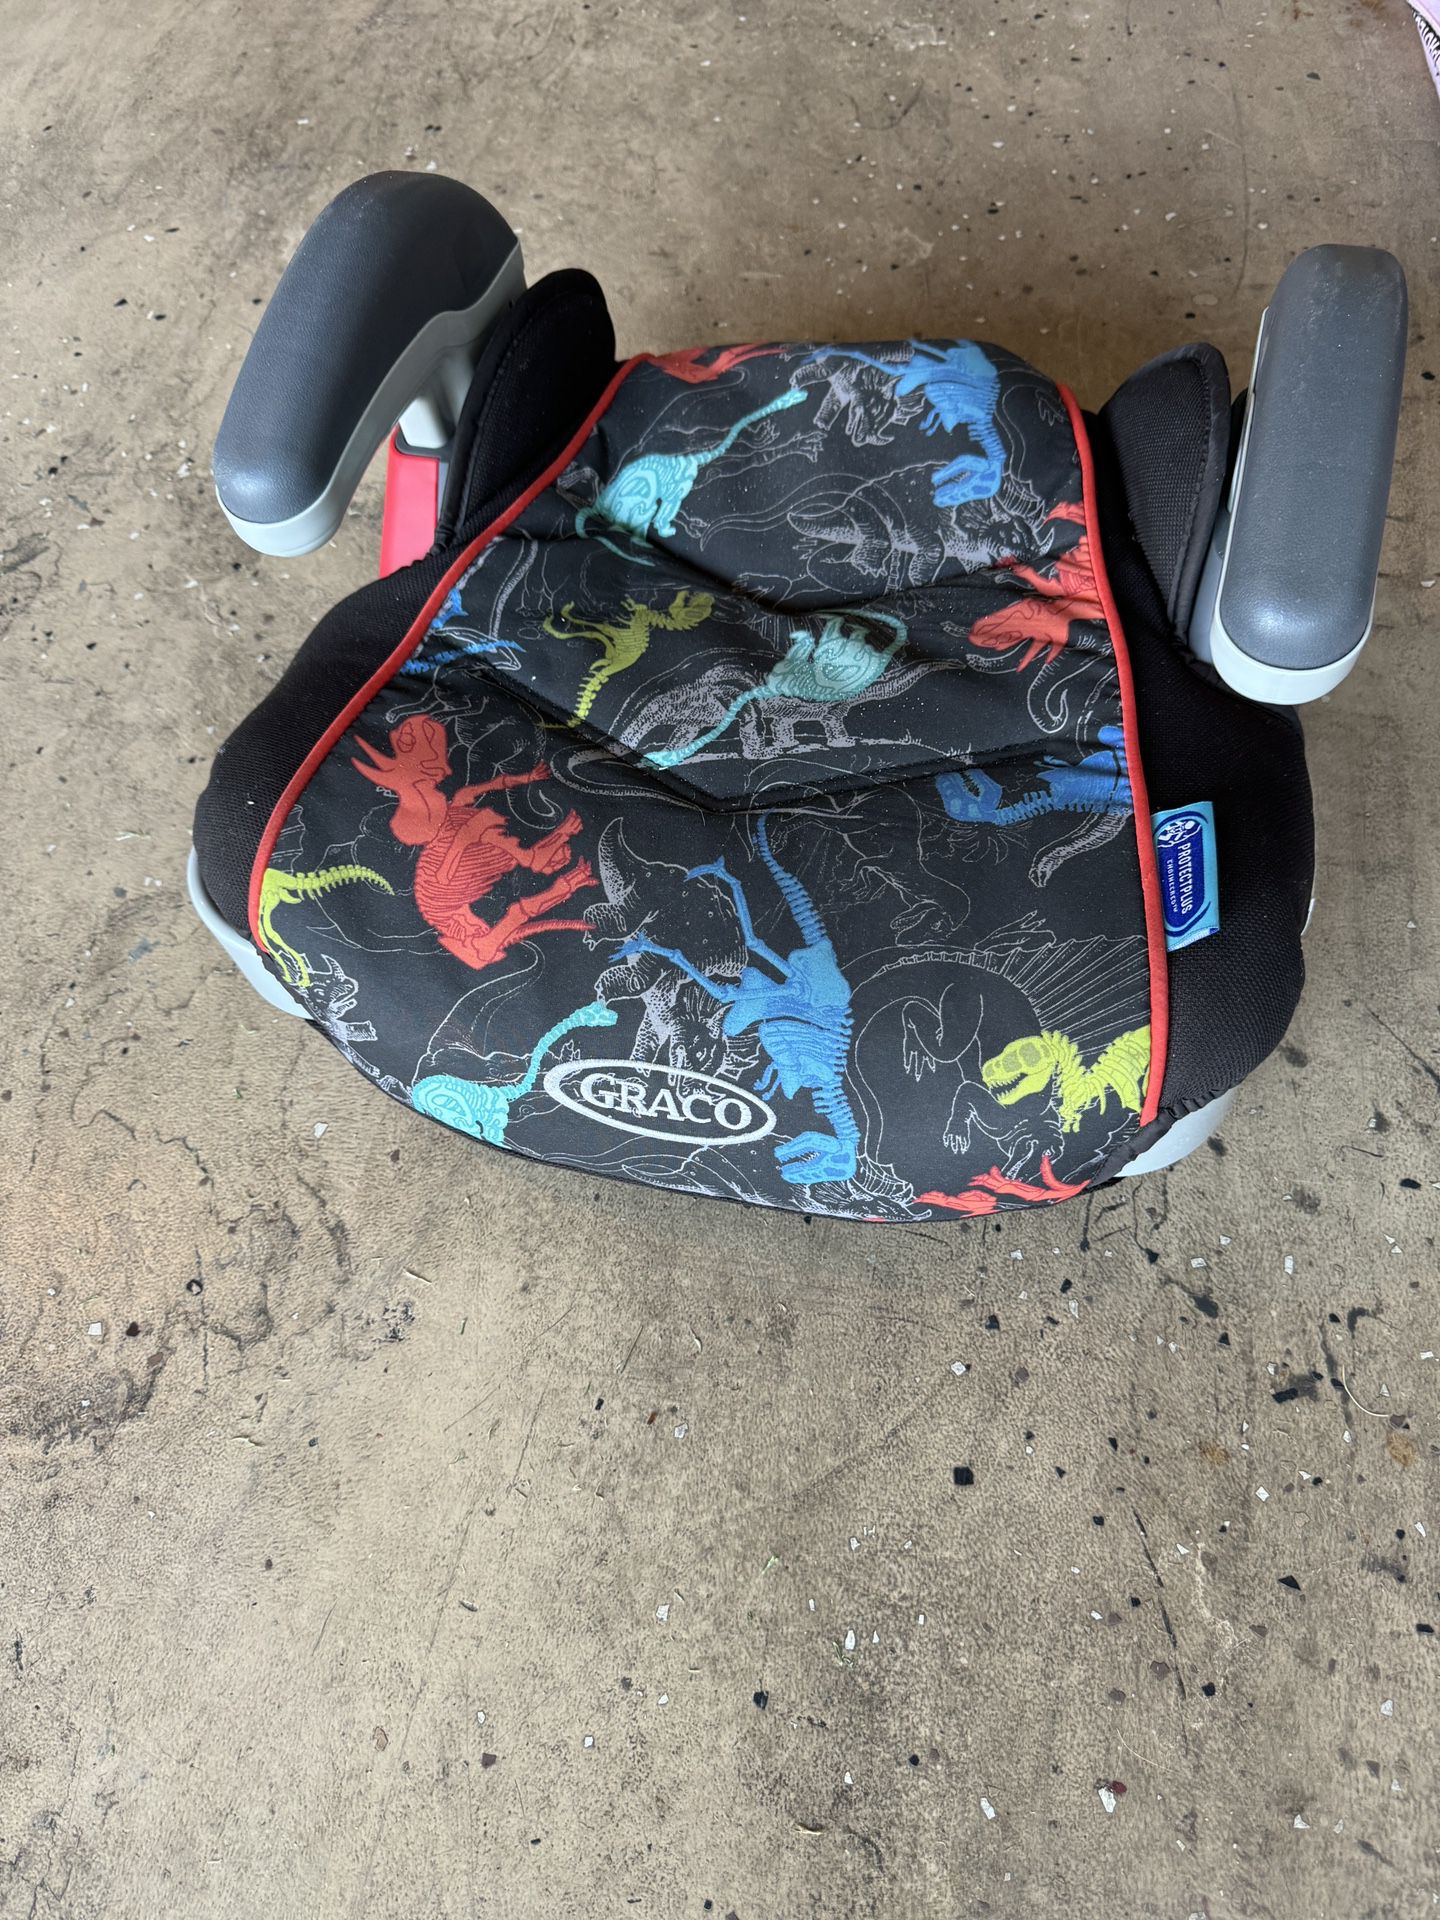 2 Graco Booster Car Seat- $25